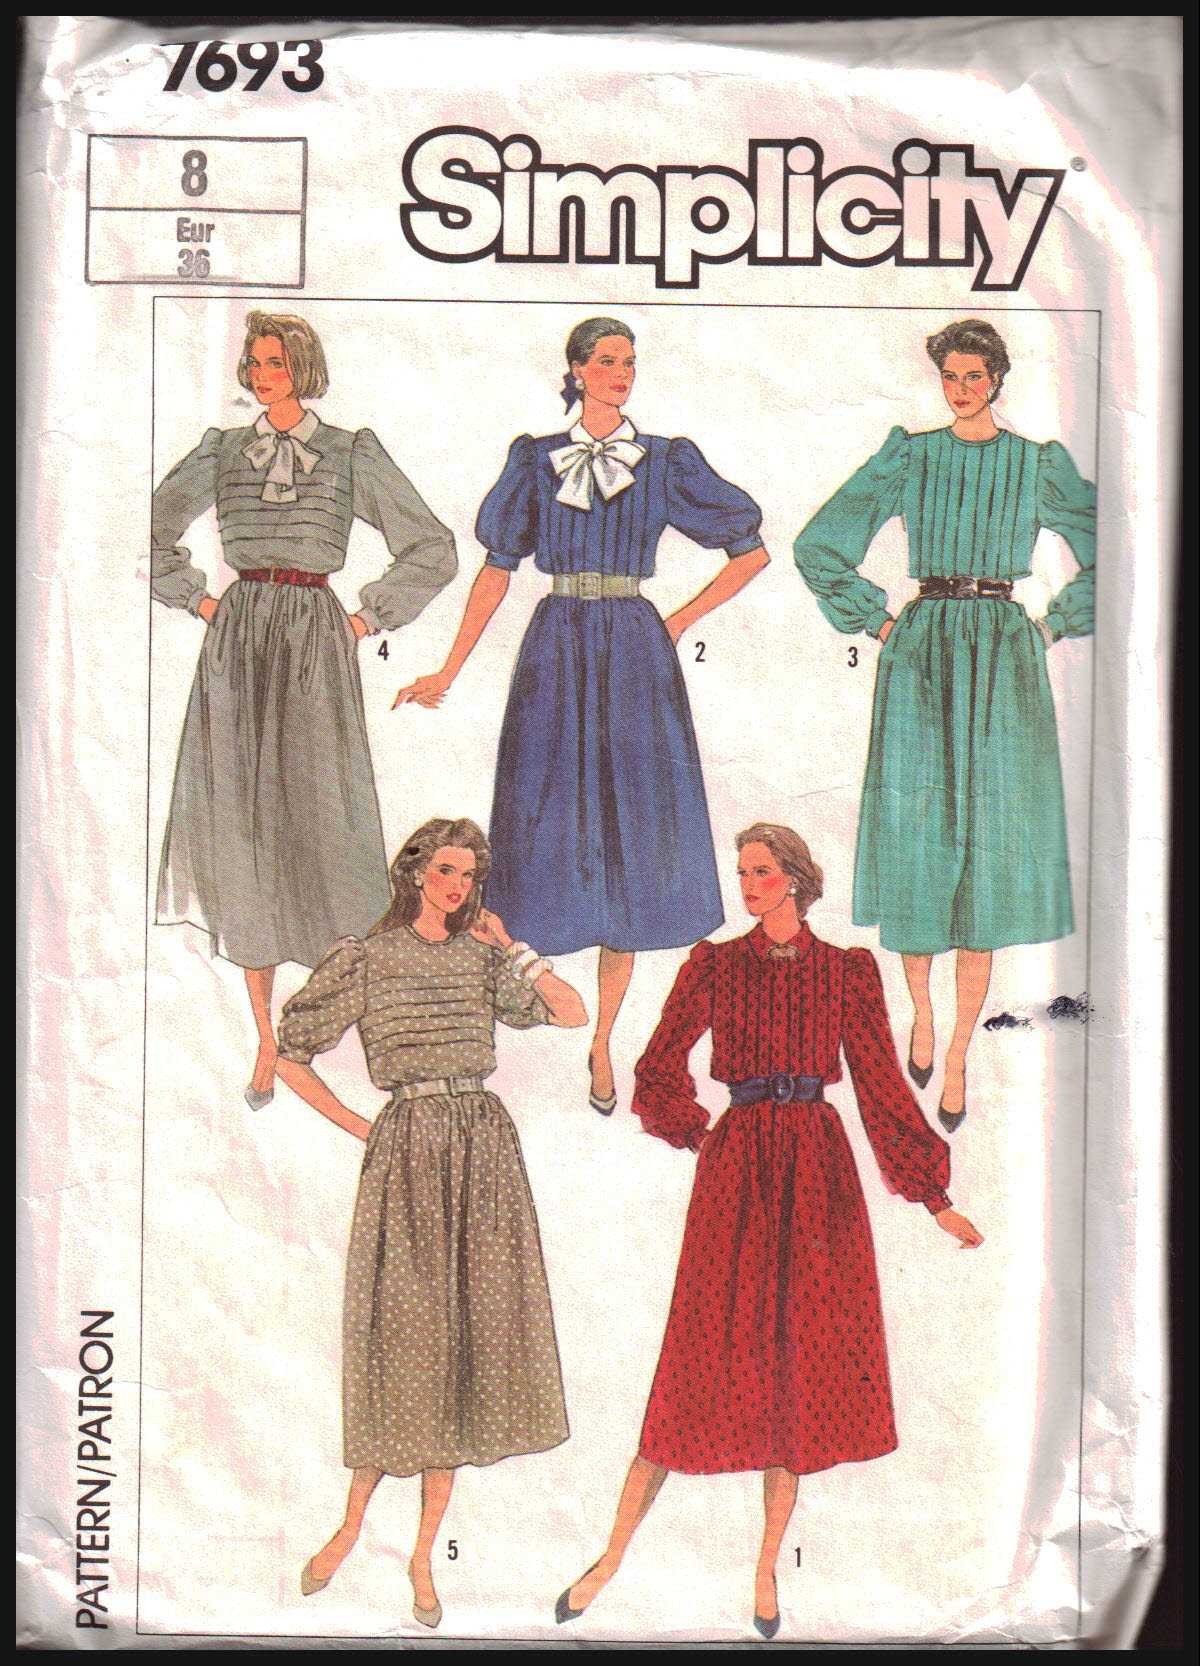 Simplicity 7693 Dress Size: 8 Used Sewing Pattern